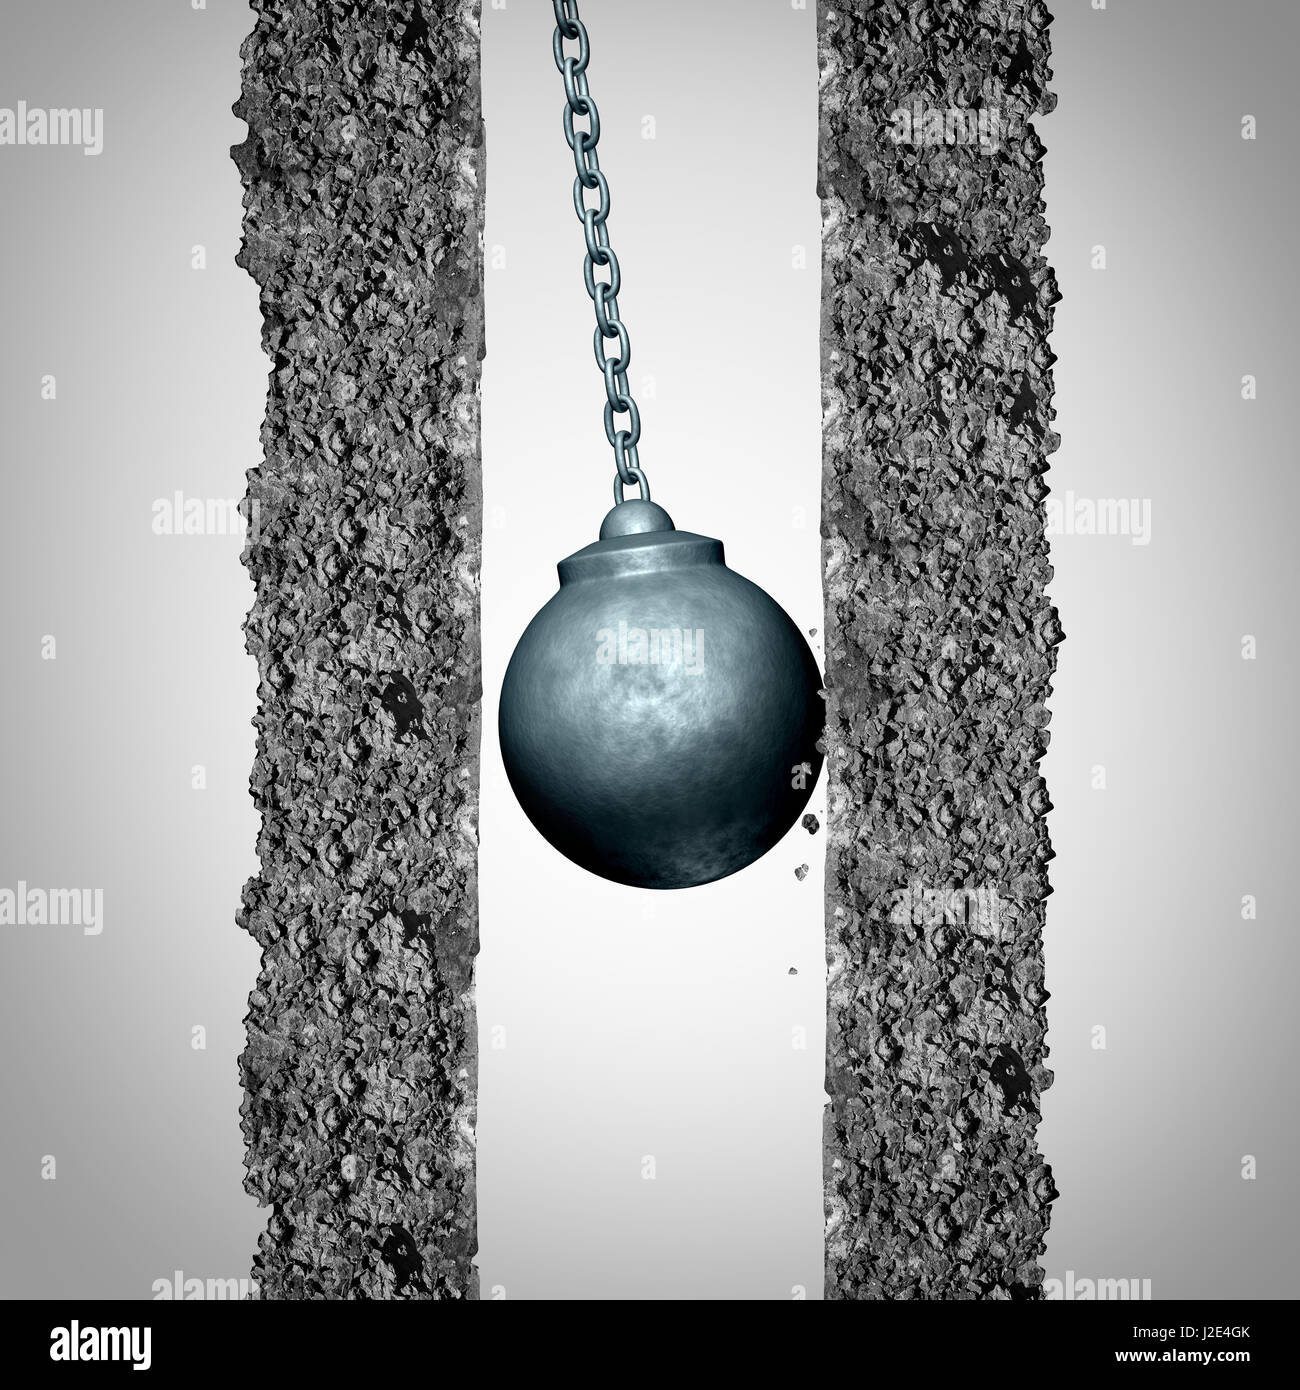 Momentum problem and limited opportunity concept as a wrecking ball limited by an inability to gather velocity due to being boxed in. Stock Photo